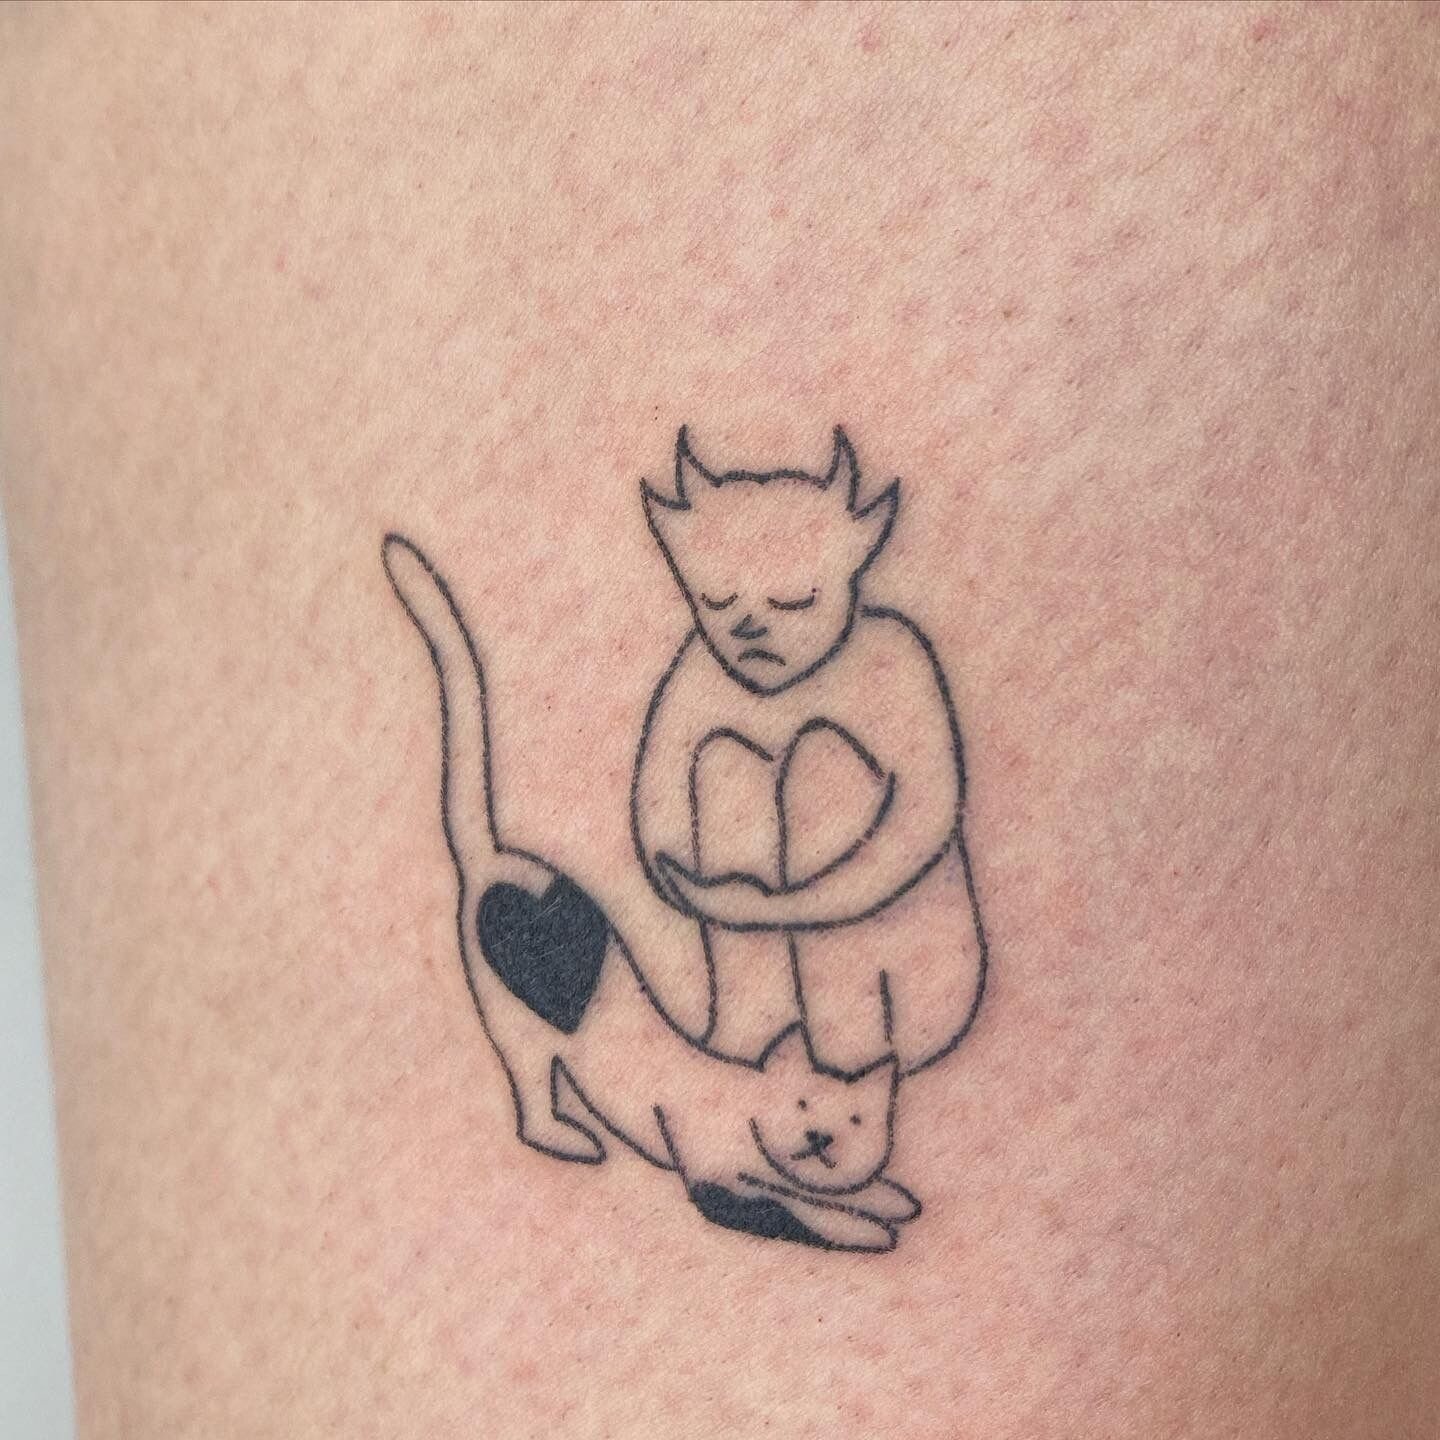 A sad little devil and their cat by @ratteface @scorpiomarstattoo⁠
⁠
⁠
⁠
⁠
#scorpiomarstattoo #ratteface #handpoke #stickandpoke #londontattoo #devil #cattattoo #deviltattoo